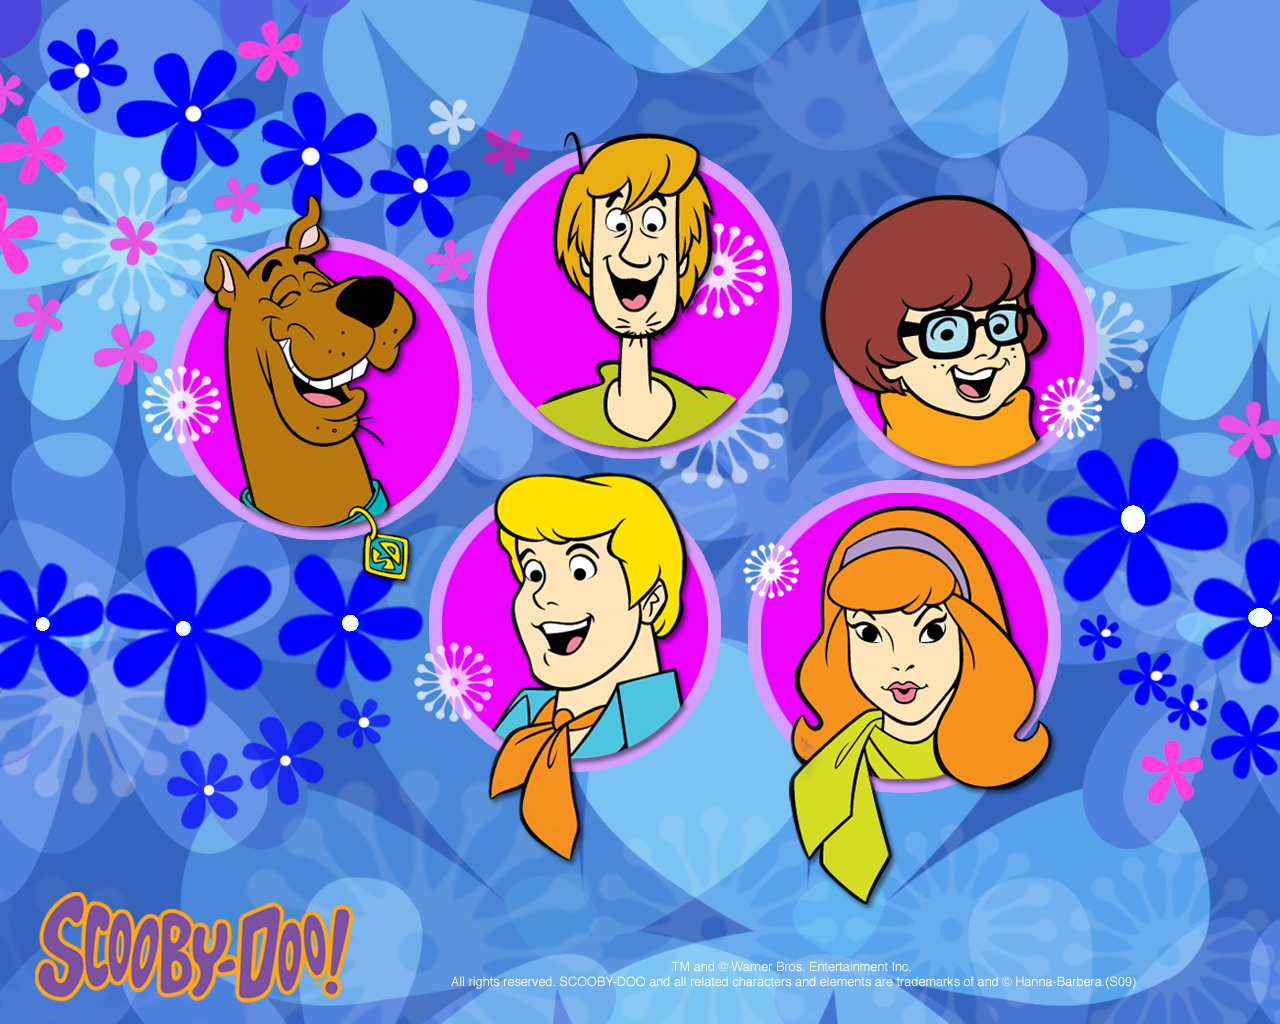 Free download Scooby doo Wallpaper May 2011 [1280x1024] for your Desktop,  Mobile & Tablet | Explore 77+ Scooby Doo Wallpaper | Scooby Doo  Backgrounds, Scooby Doo Wallpapers, Scooby Doo Wallpaper HD